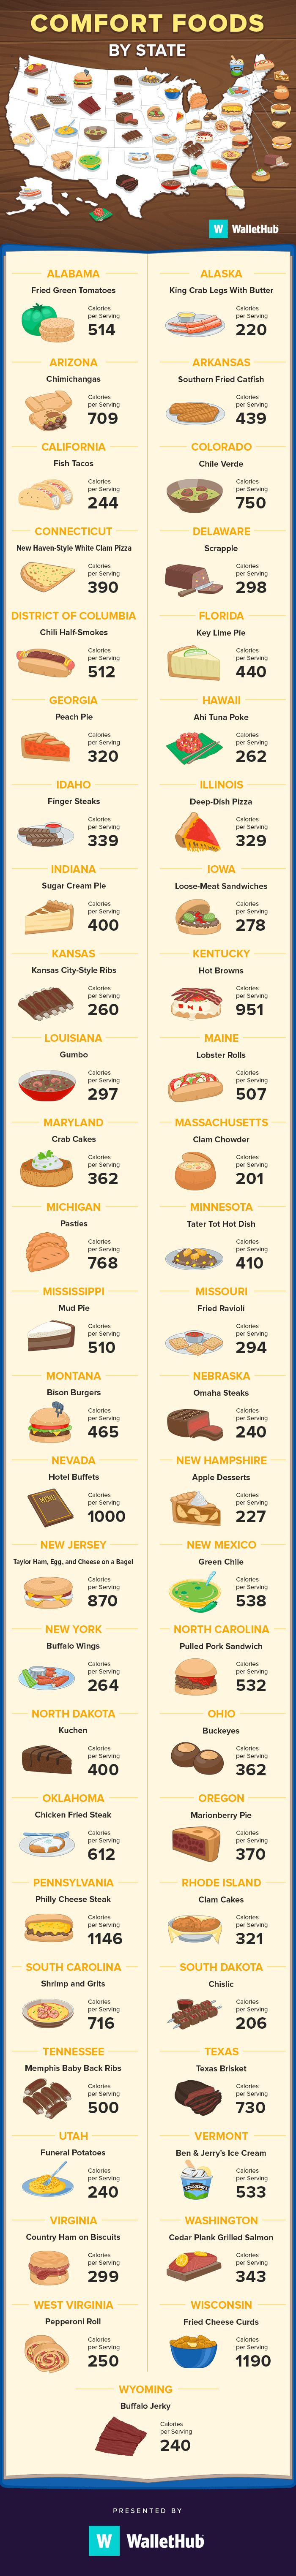 Comfort-Foods-By-State-2022